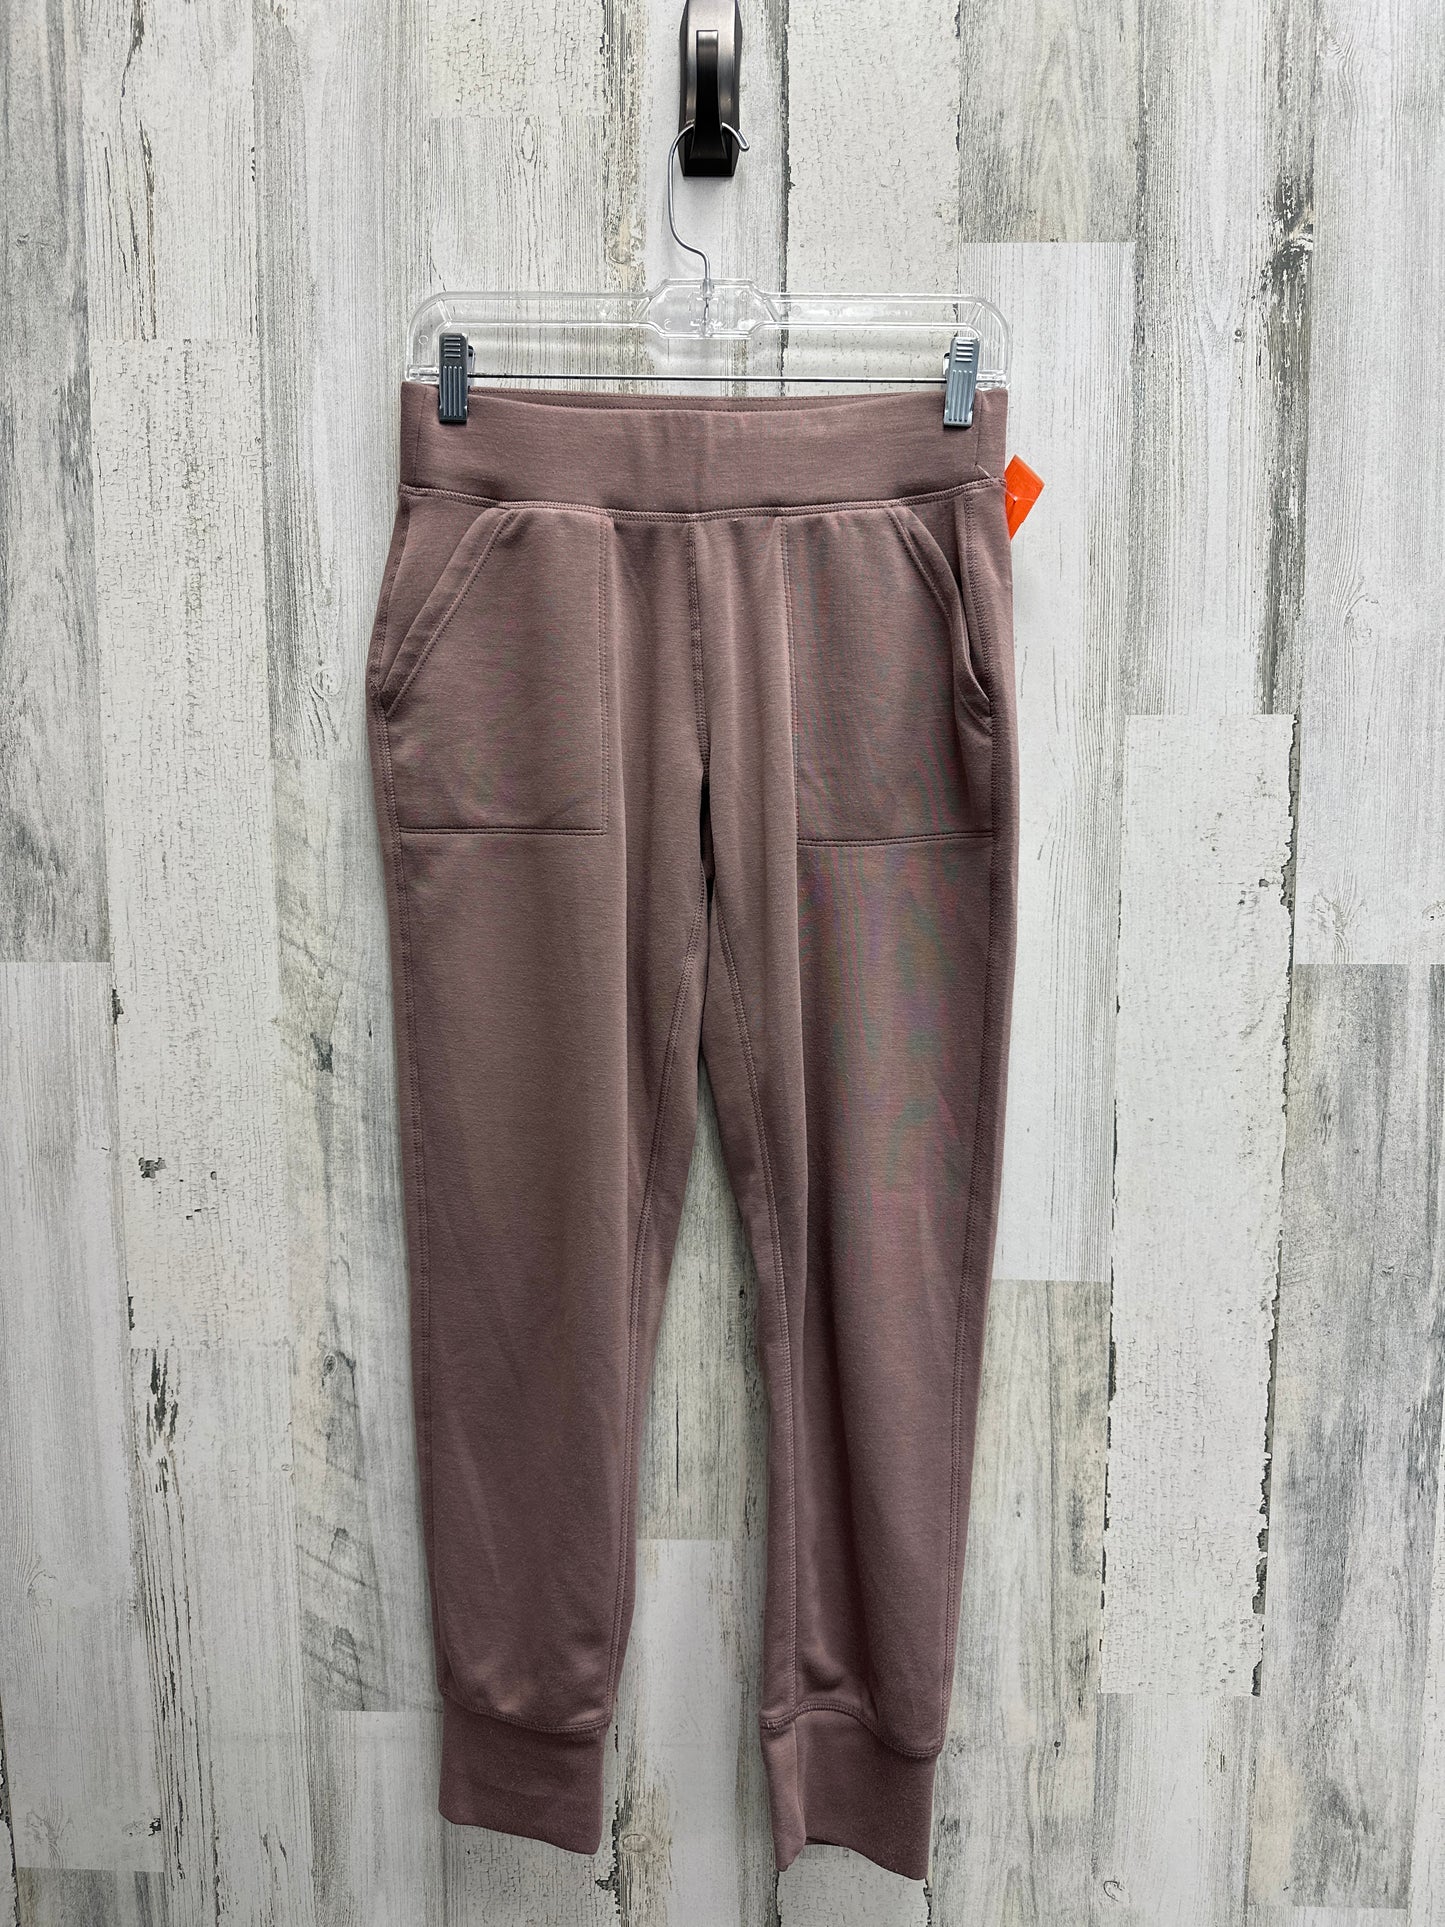 Athletic Pants By Gaiam  Size: Xs